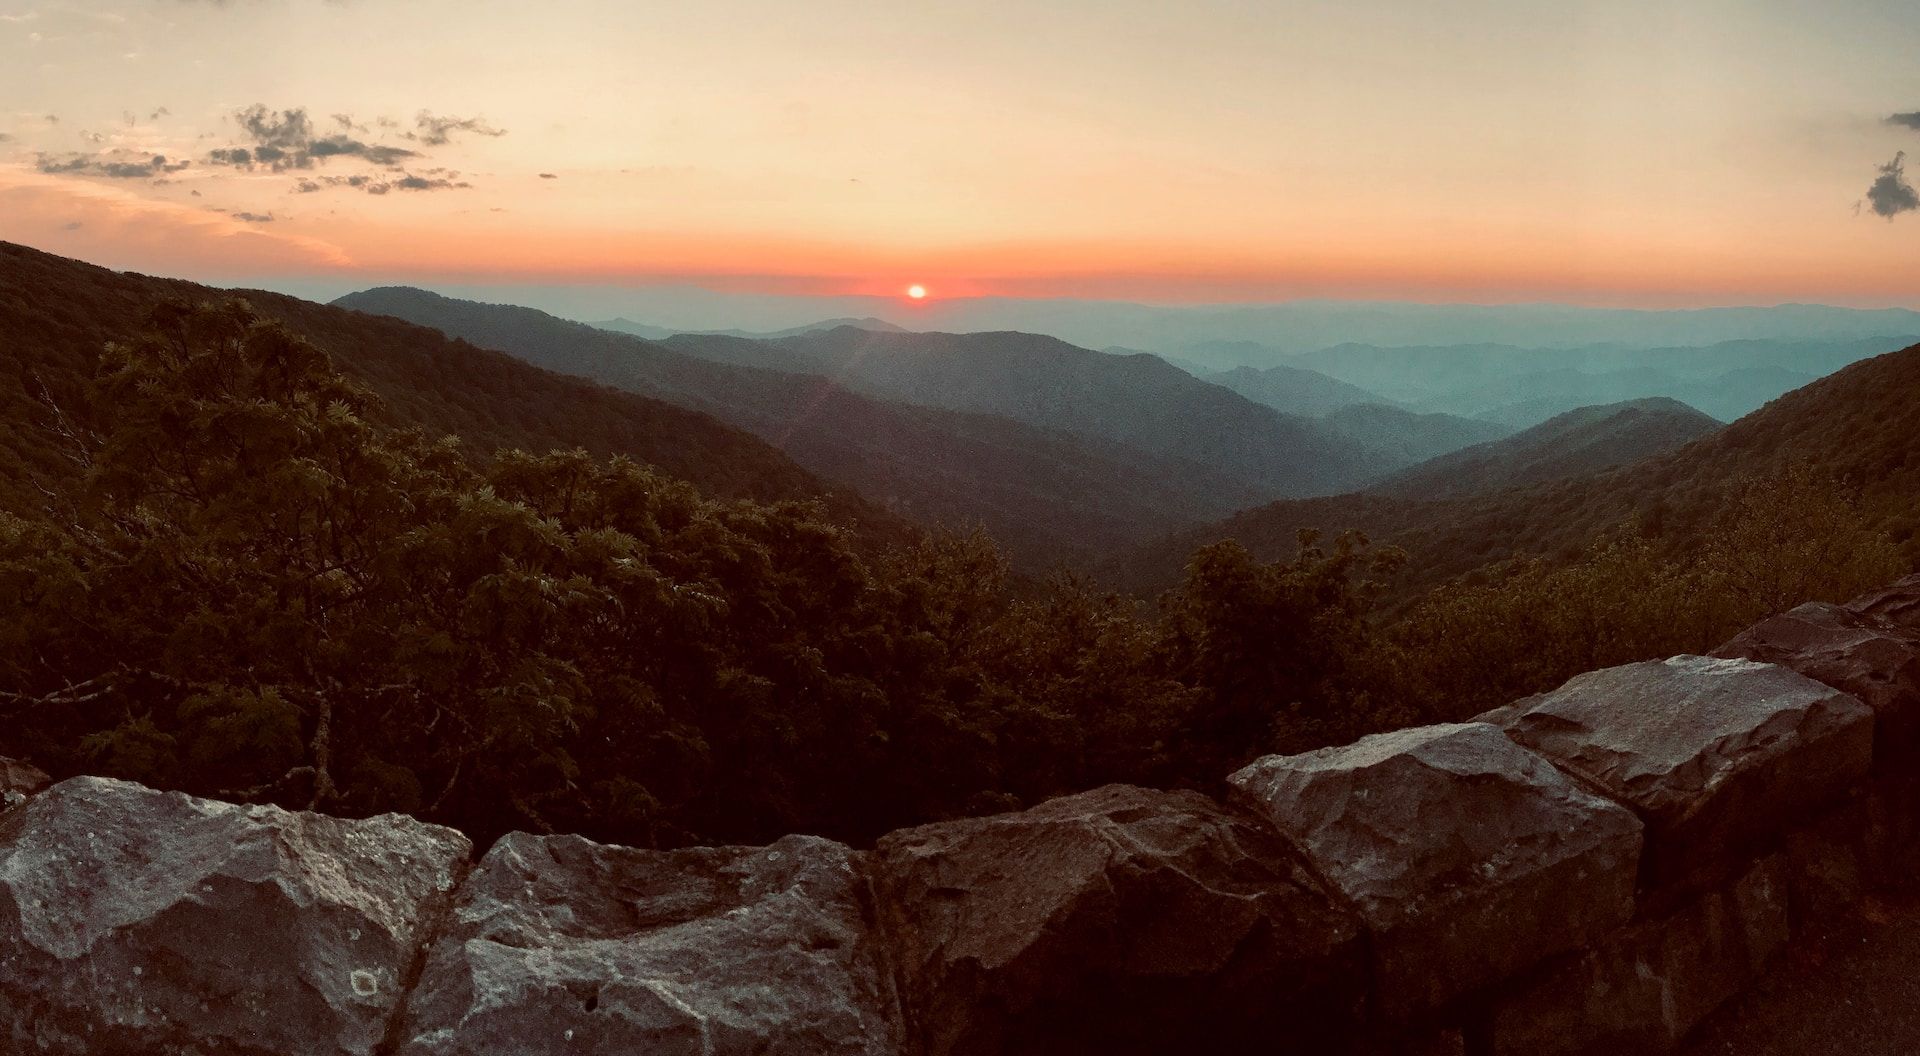 Sun setting over the Blue Ridge Mountains viewed from Skyline Drive